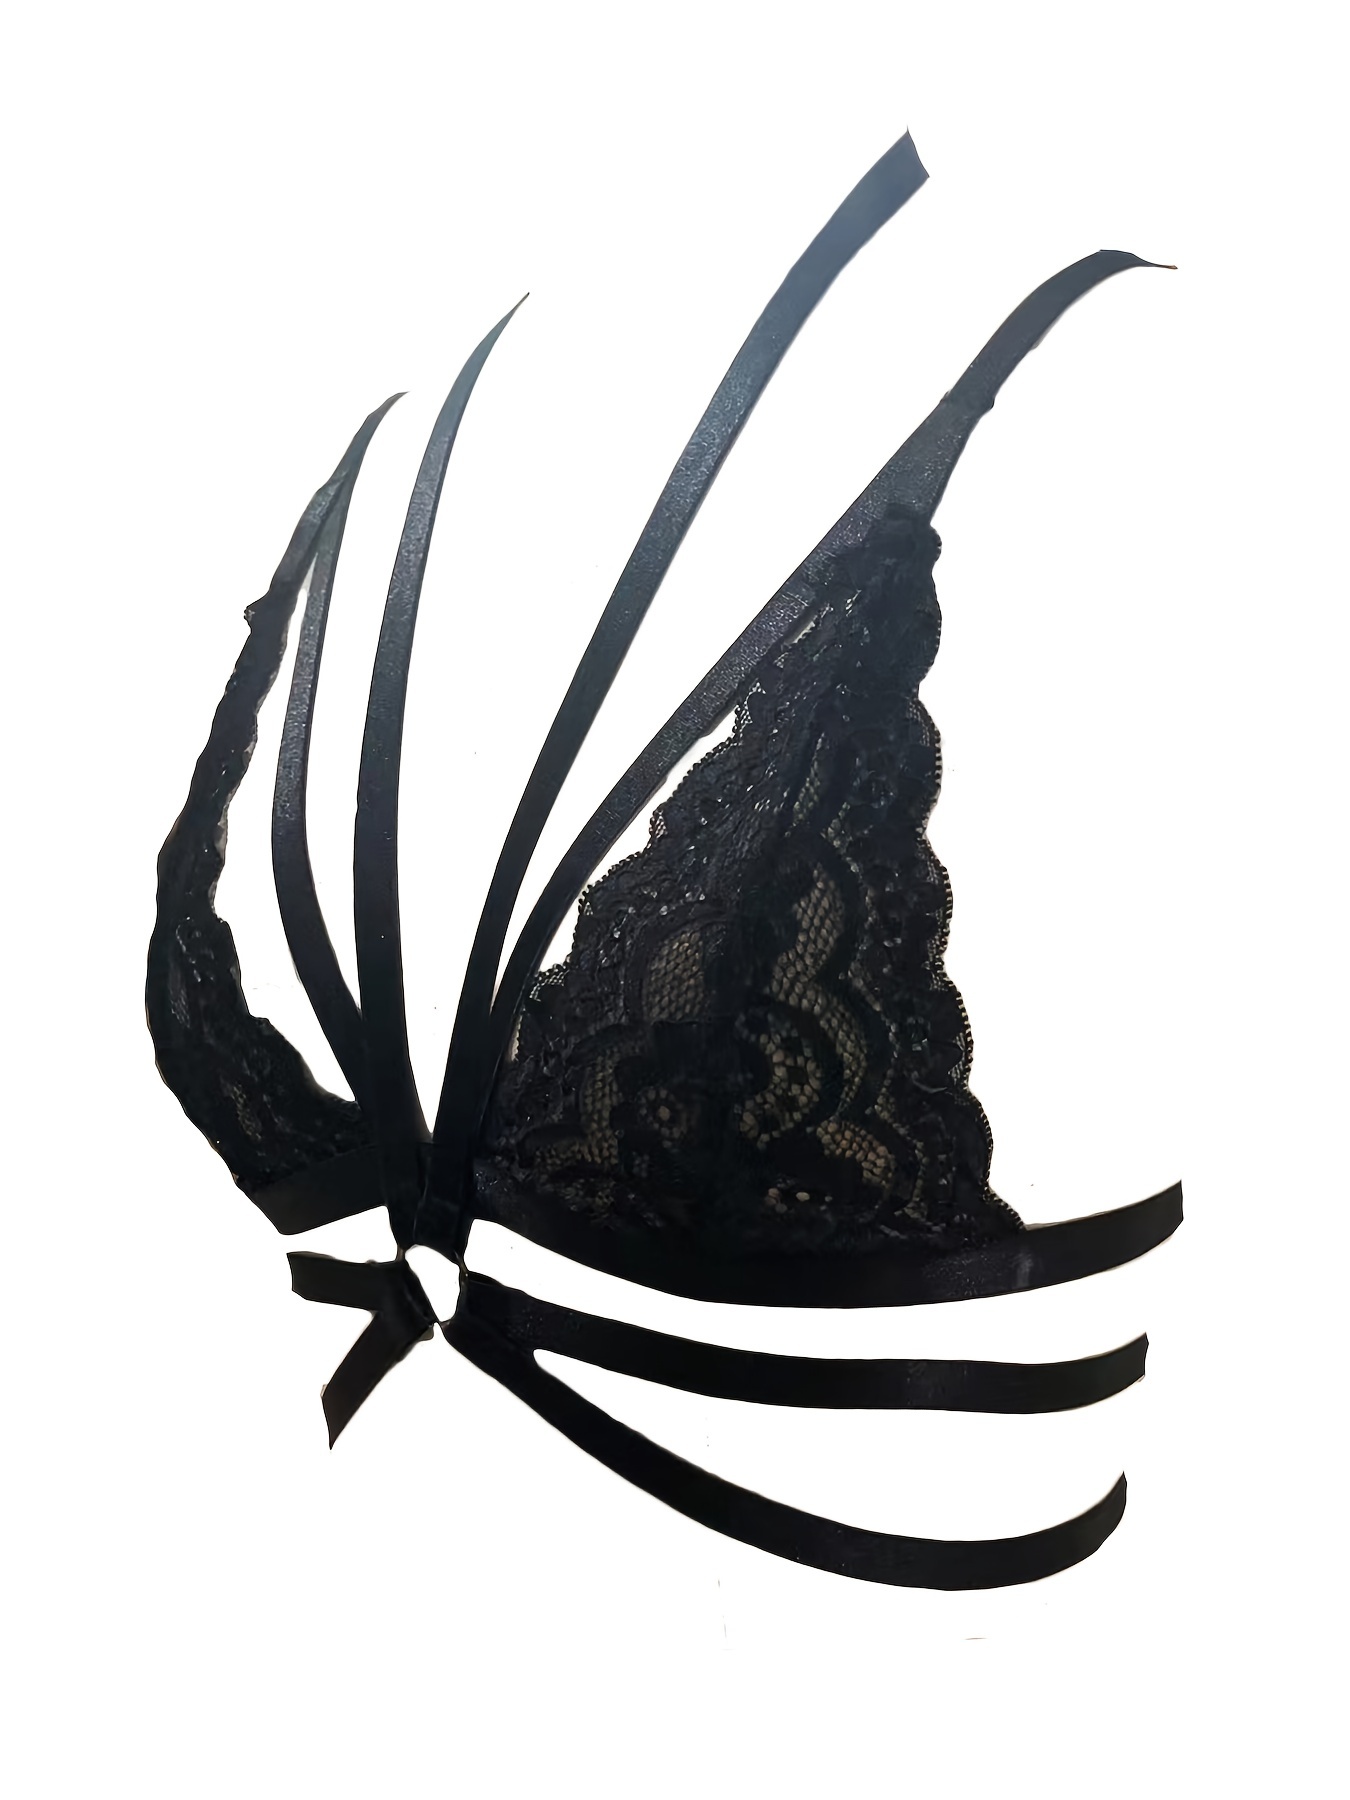 Sexy Gothic Lace Panel Body Harness Bra - Adjustable Size, Sheer &  Translucent, Perfect for Dance Performances & Valentine's Day Gifts